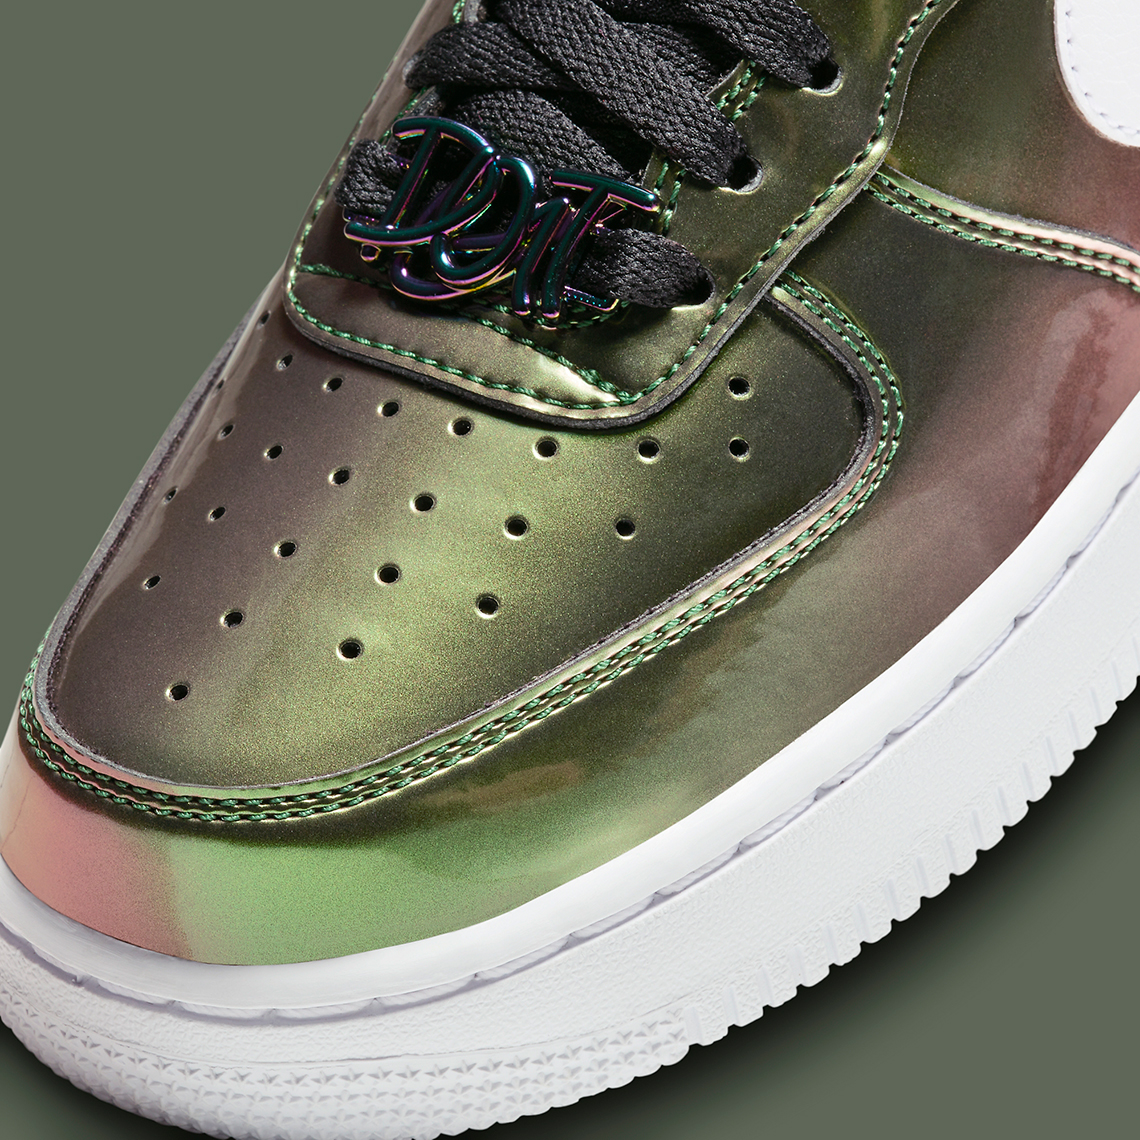 Nike Air Force 1 Low Just Do It Iridescent Fv1173 010 5